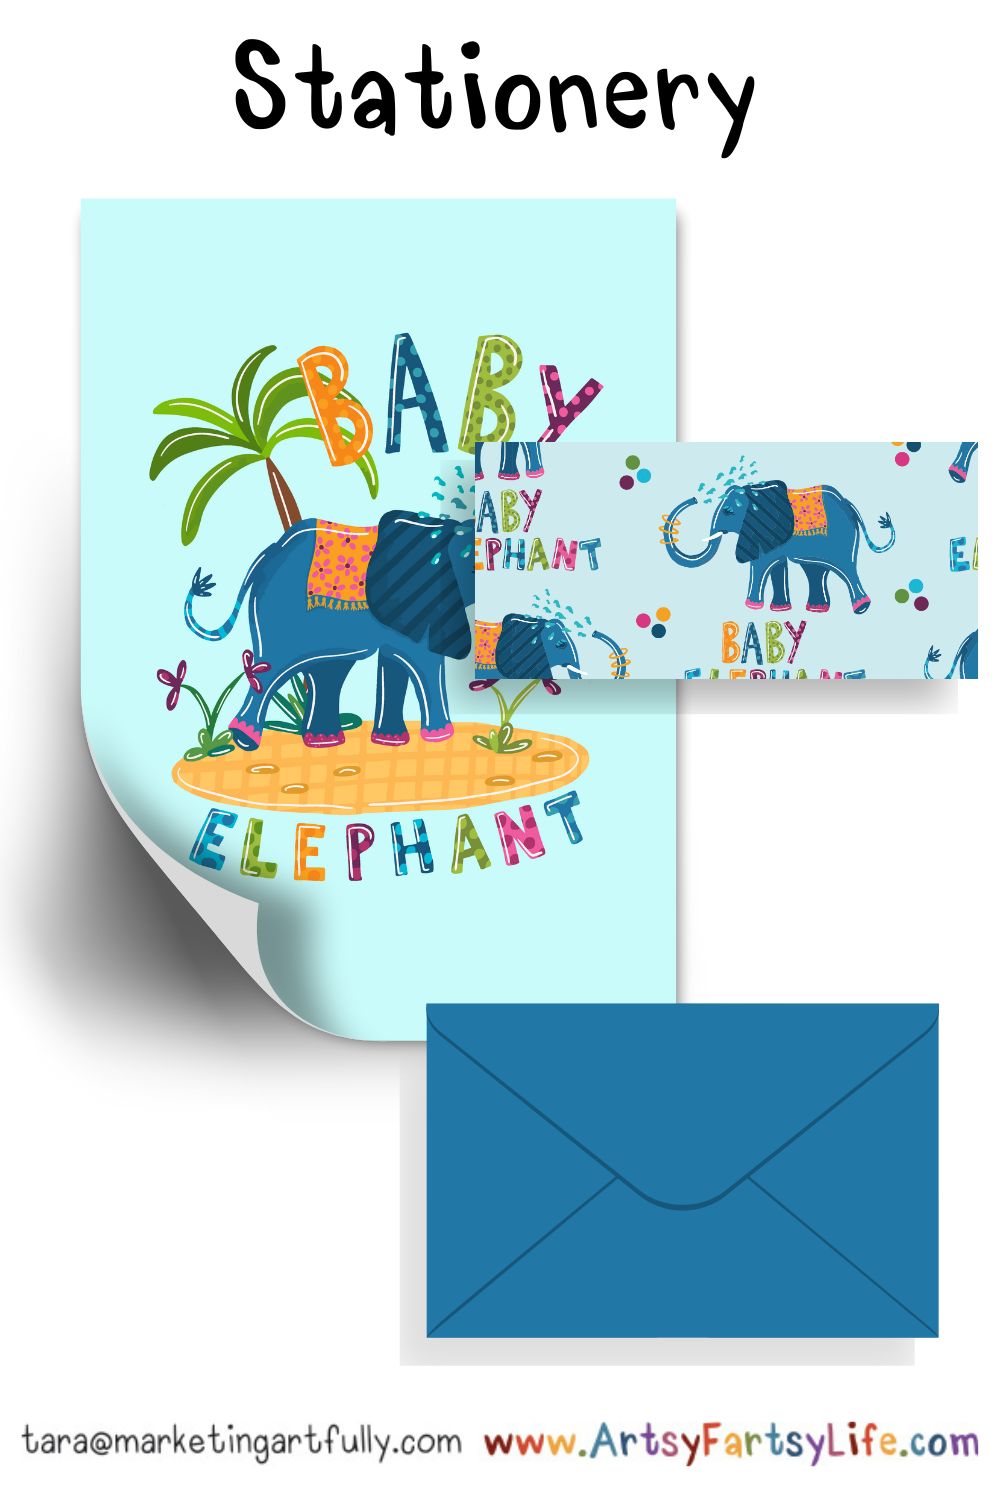 Baby Elephant Surface Design For Greeting Cards and Stationery